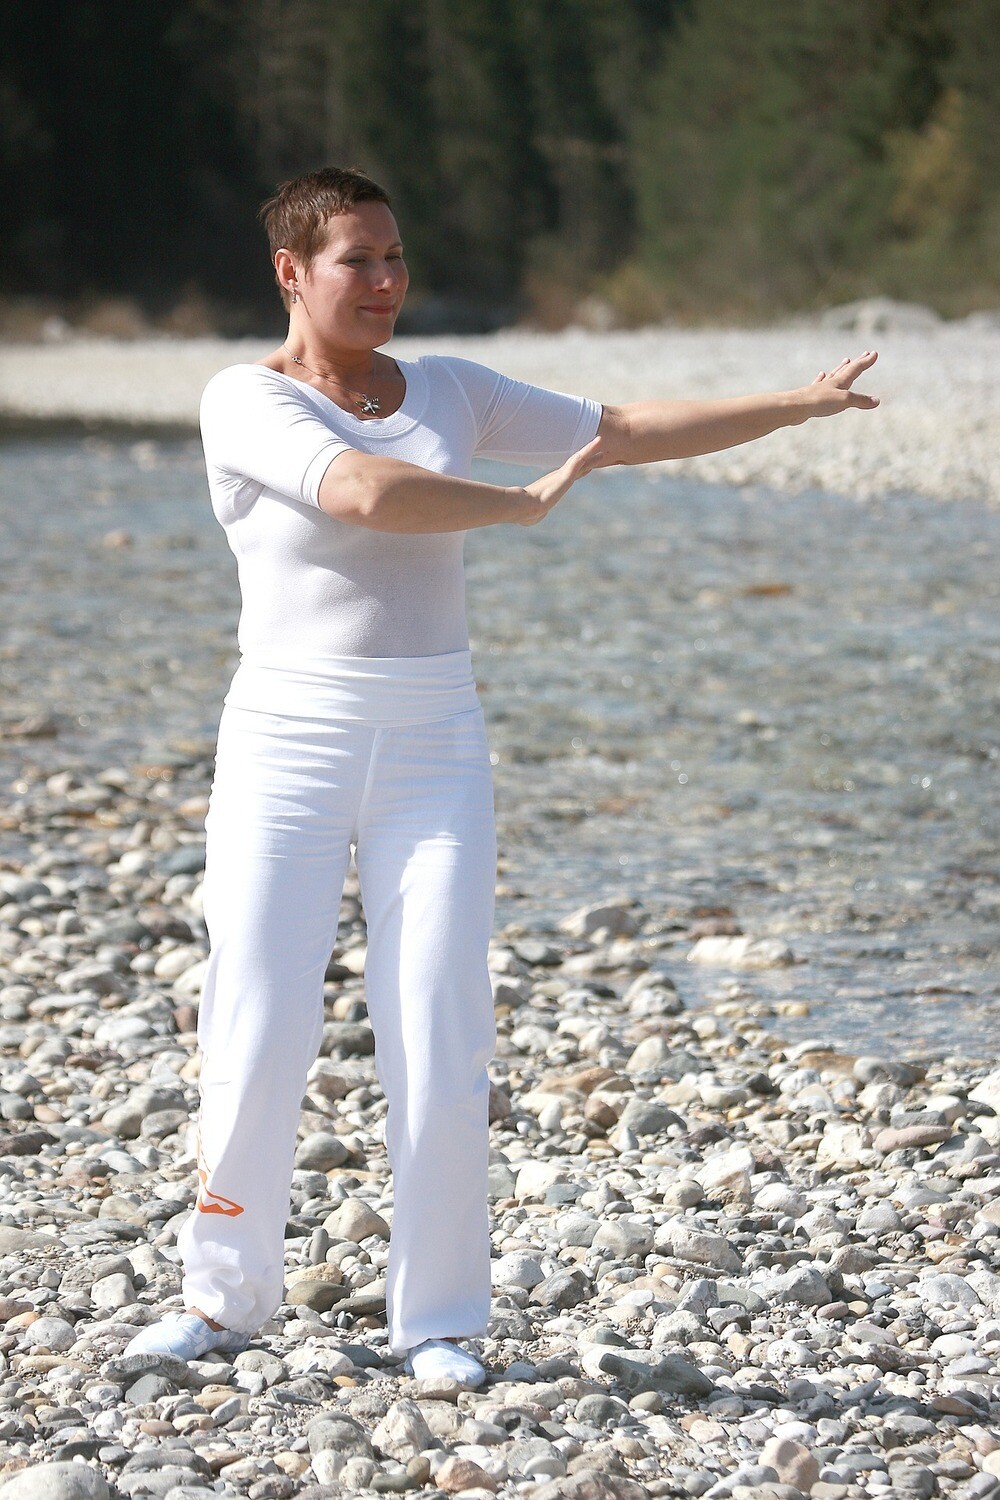 Tai Chi for Health - Spring Practice (March/April)